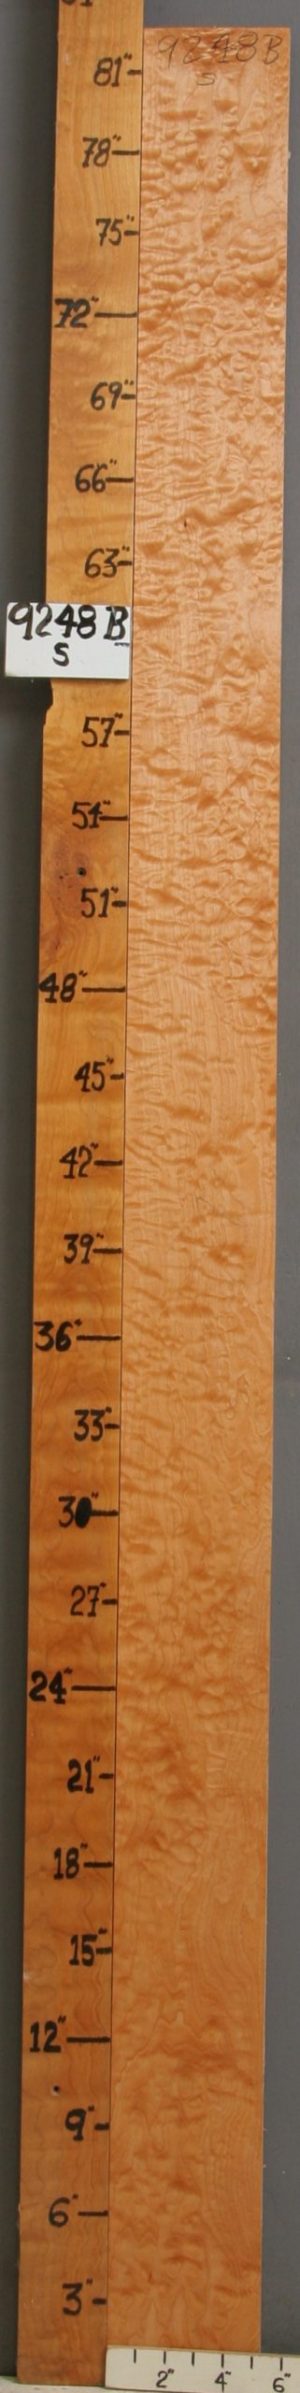 MUSICAL QUILTED MAPLE LUMBER 5"1/2 X 82" X 4/4 (NWT-9248B)